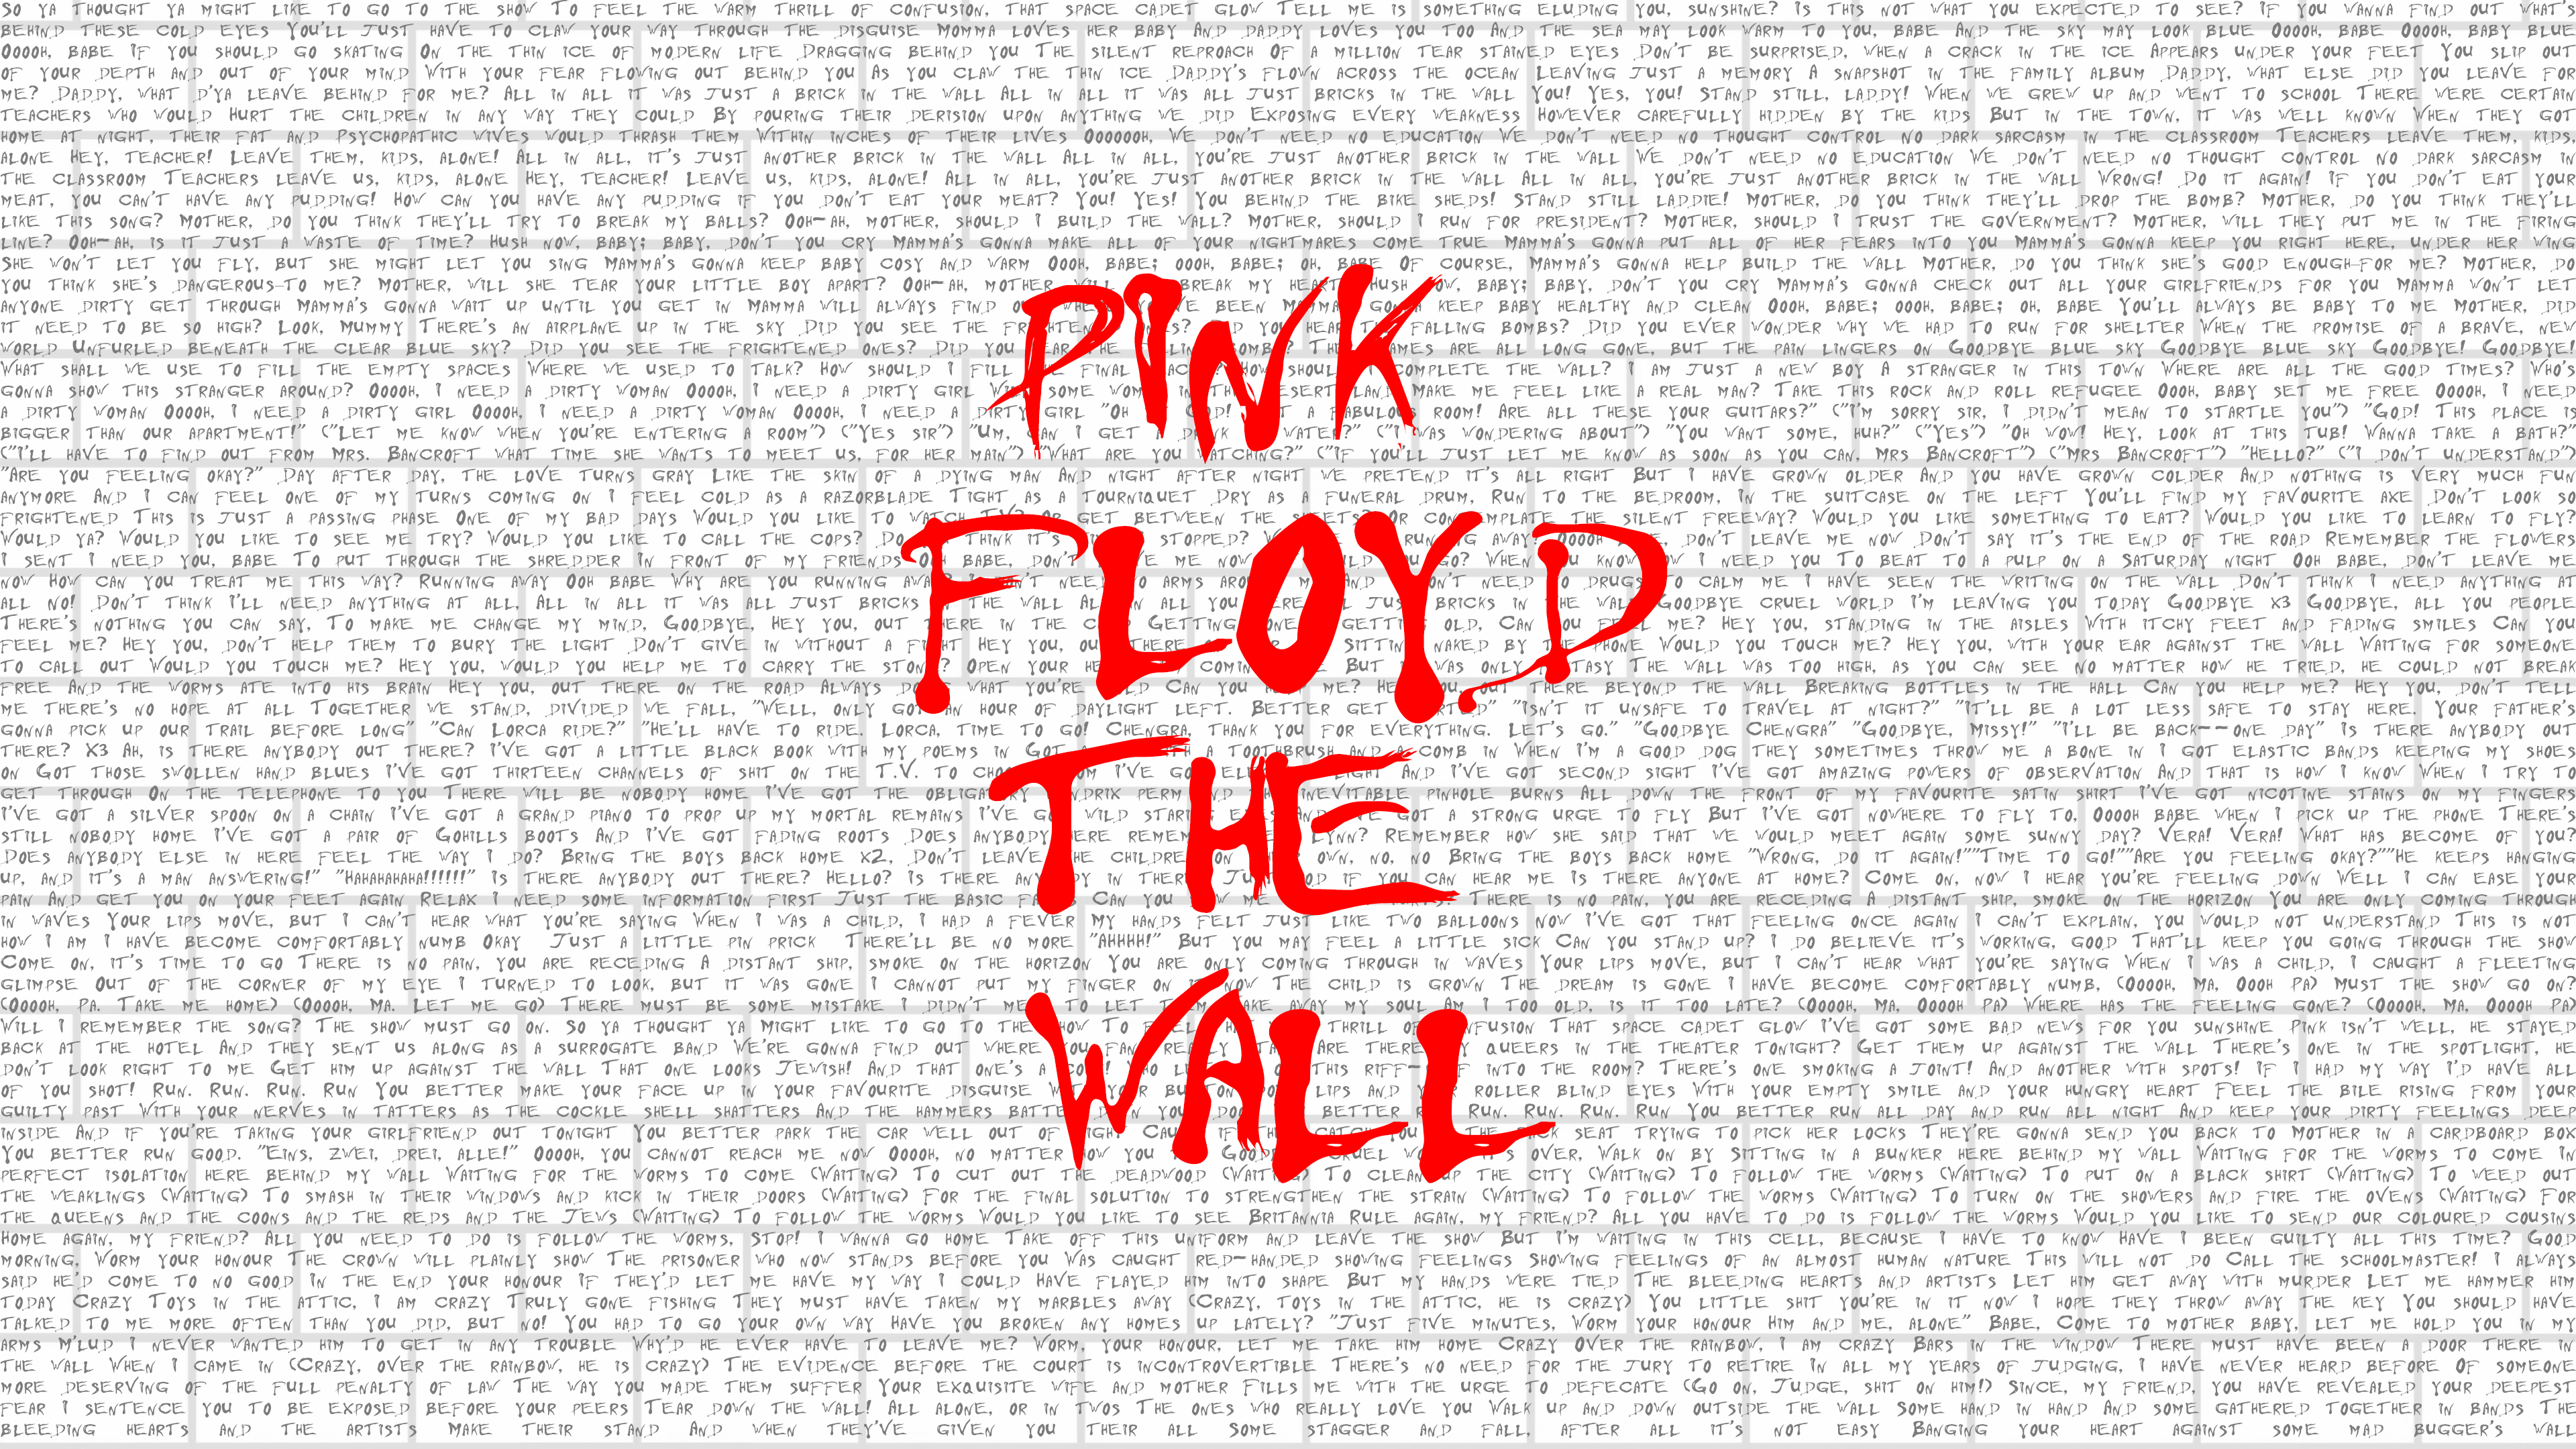 pink floyd the wall full album online download free